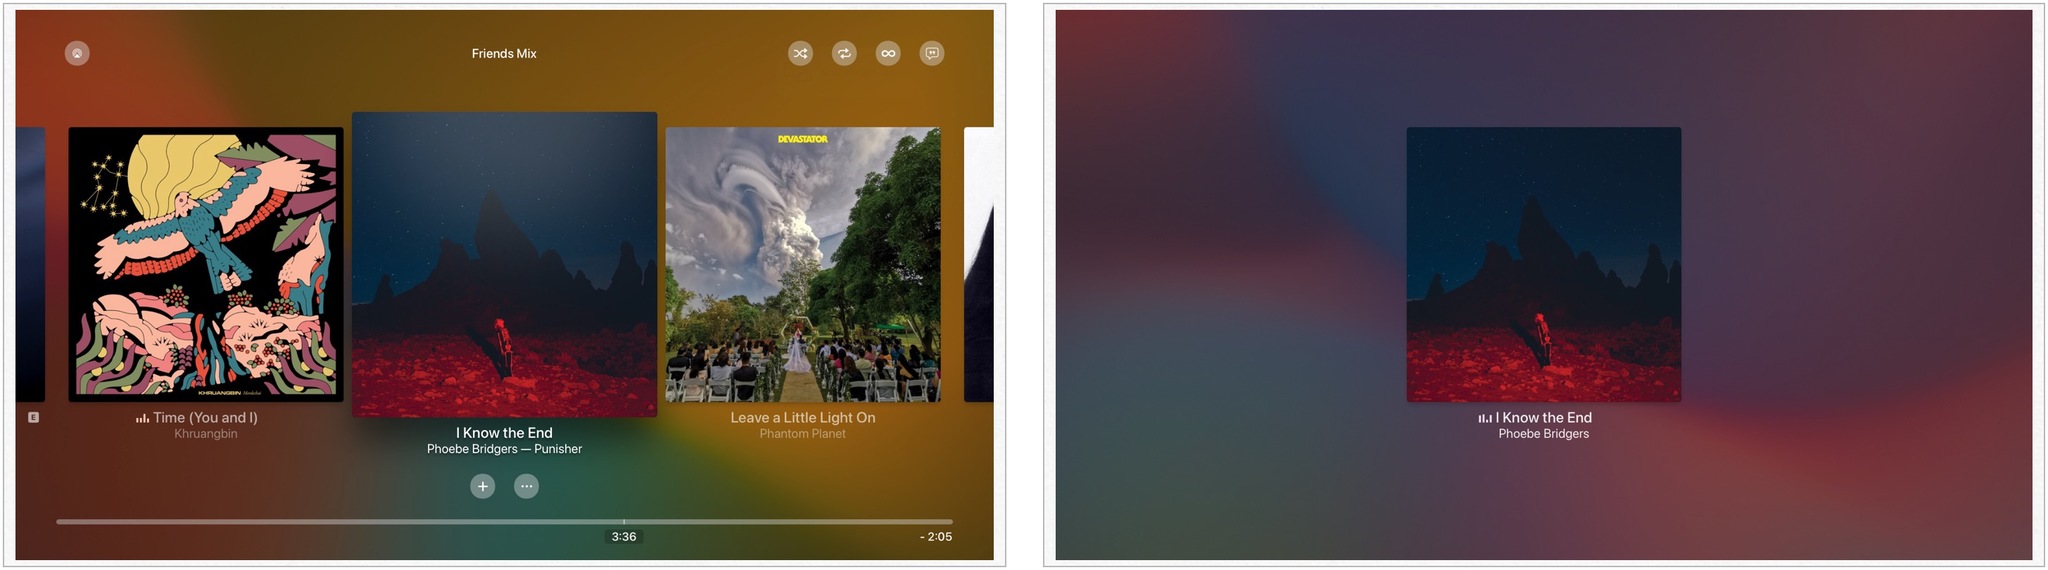 To skip tracks in the Music app on Apple TV, swipe left or right to pick a different song. Select the new song.